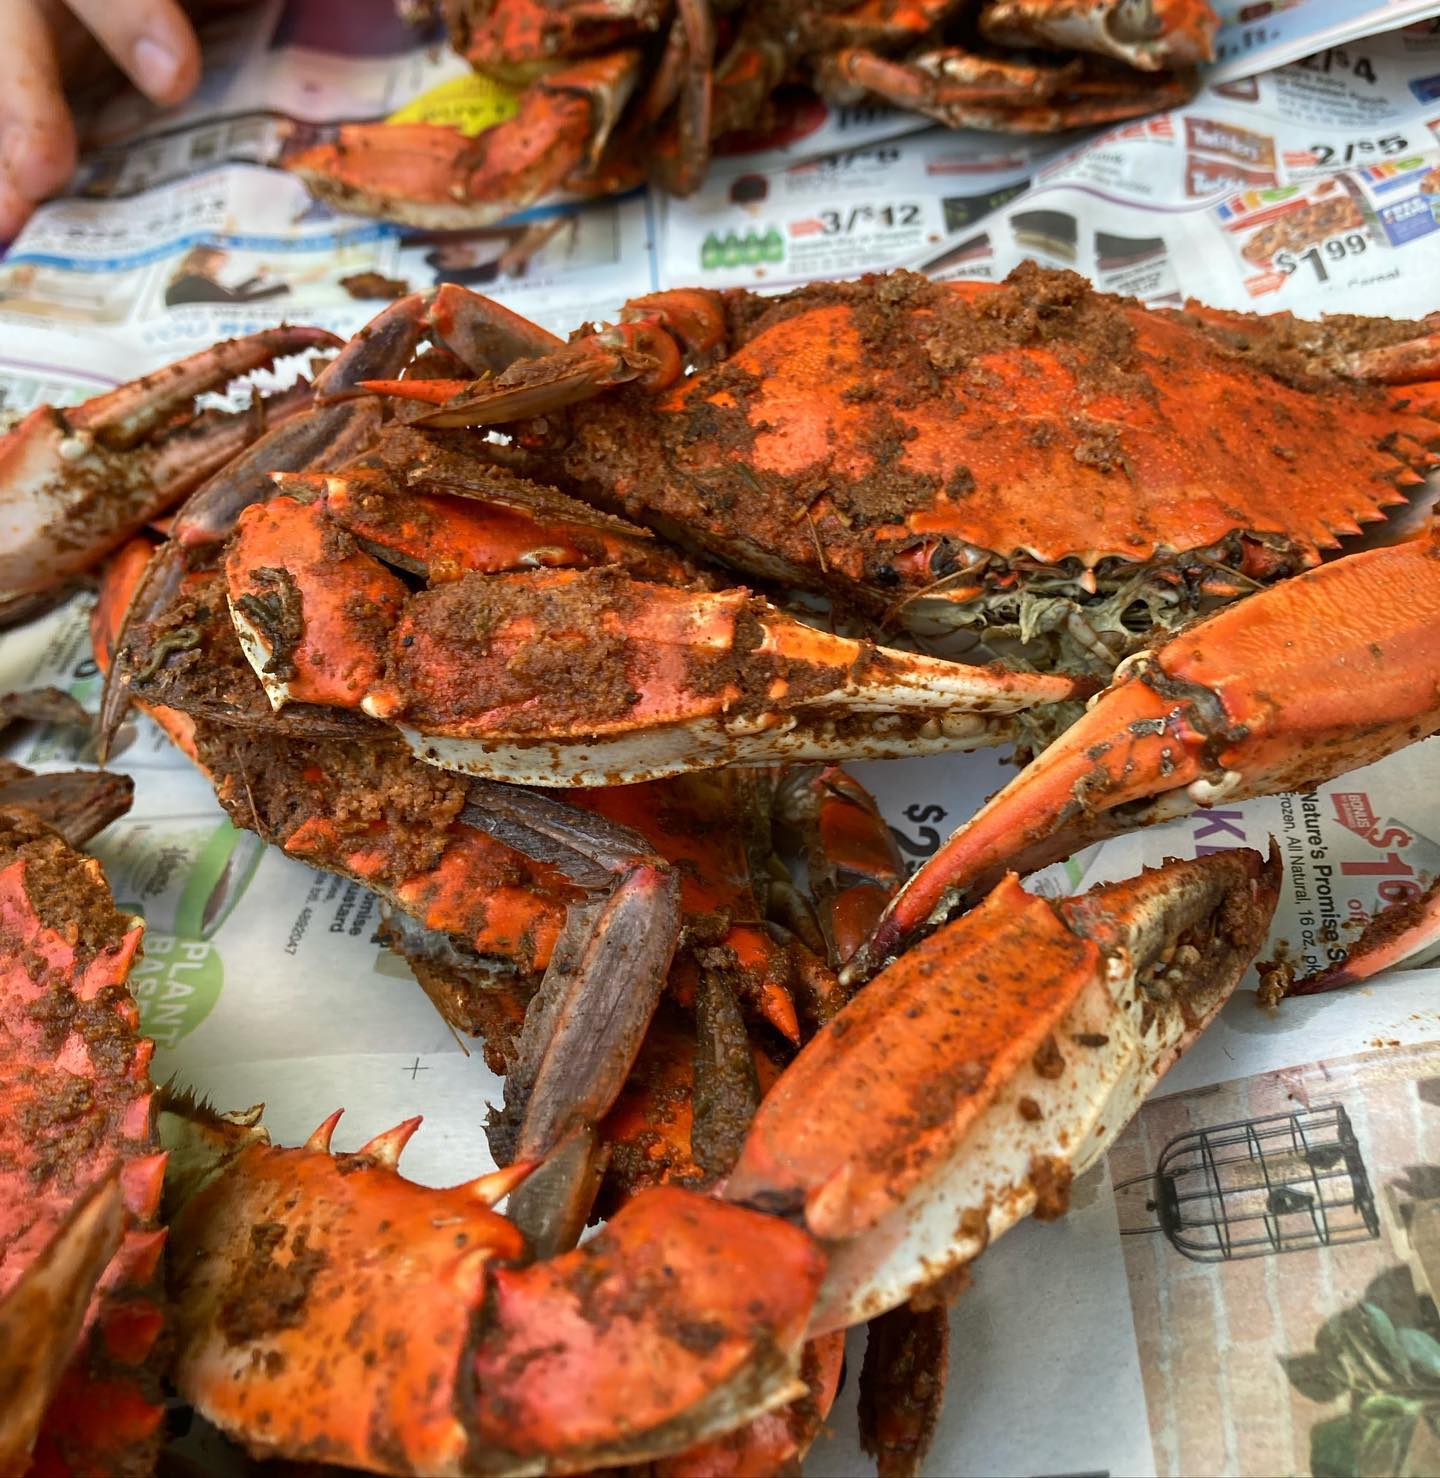 It’s a Maryland thing 😎 . . . . . . #marylandcrabs #steamedcrabs #crabfeast #baltimore #maryland #oldbay #crabmeat #whatsonmyplate #dmvblogger #seafood #seafoodlover #crabs #crablegs🦀